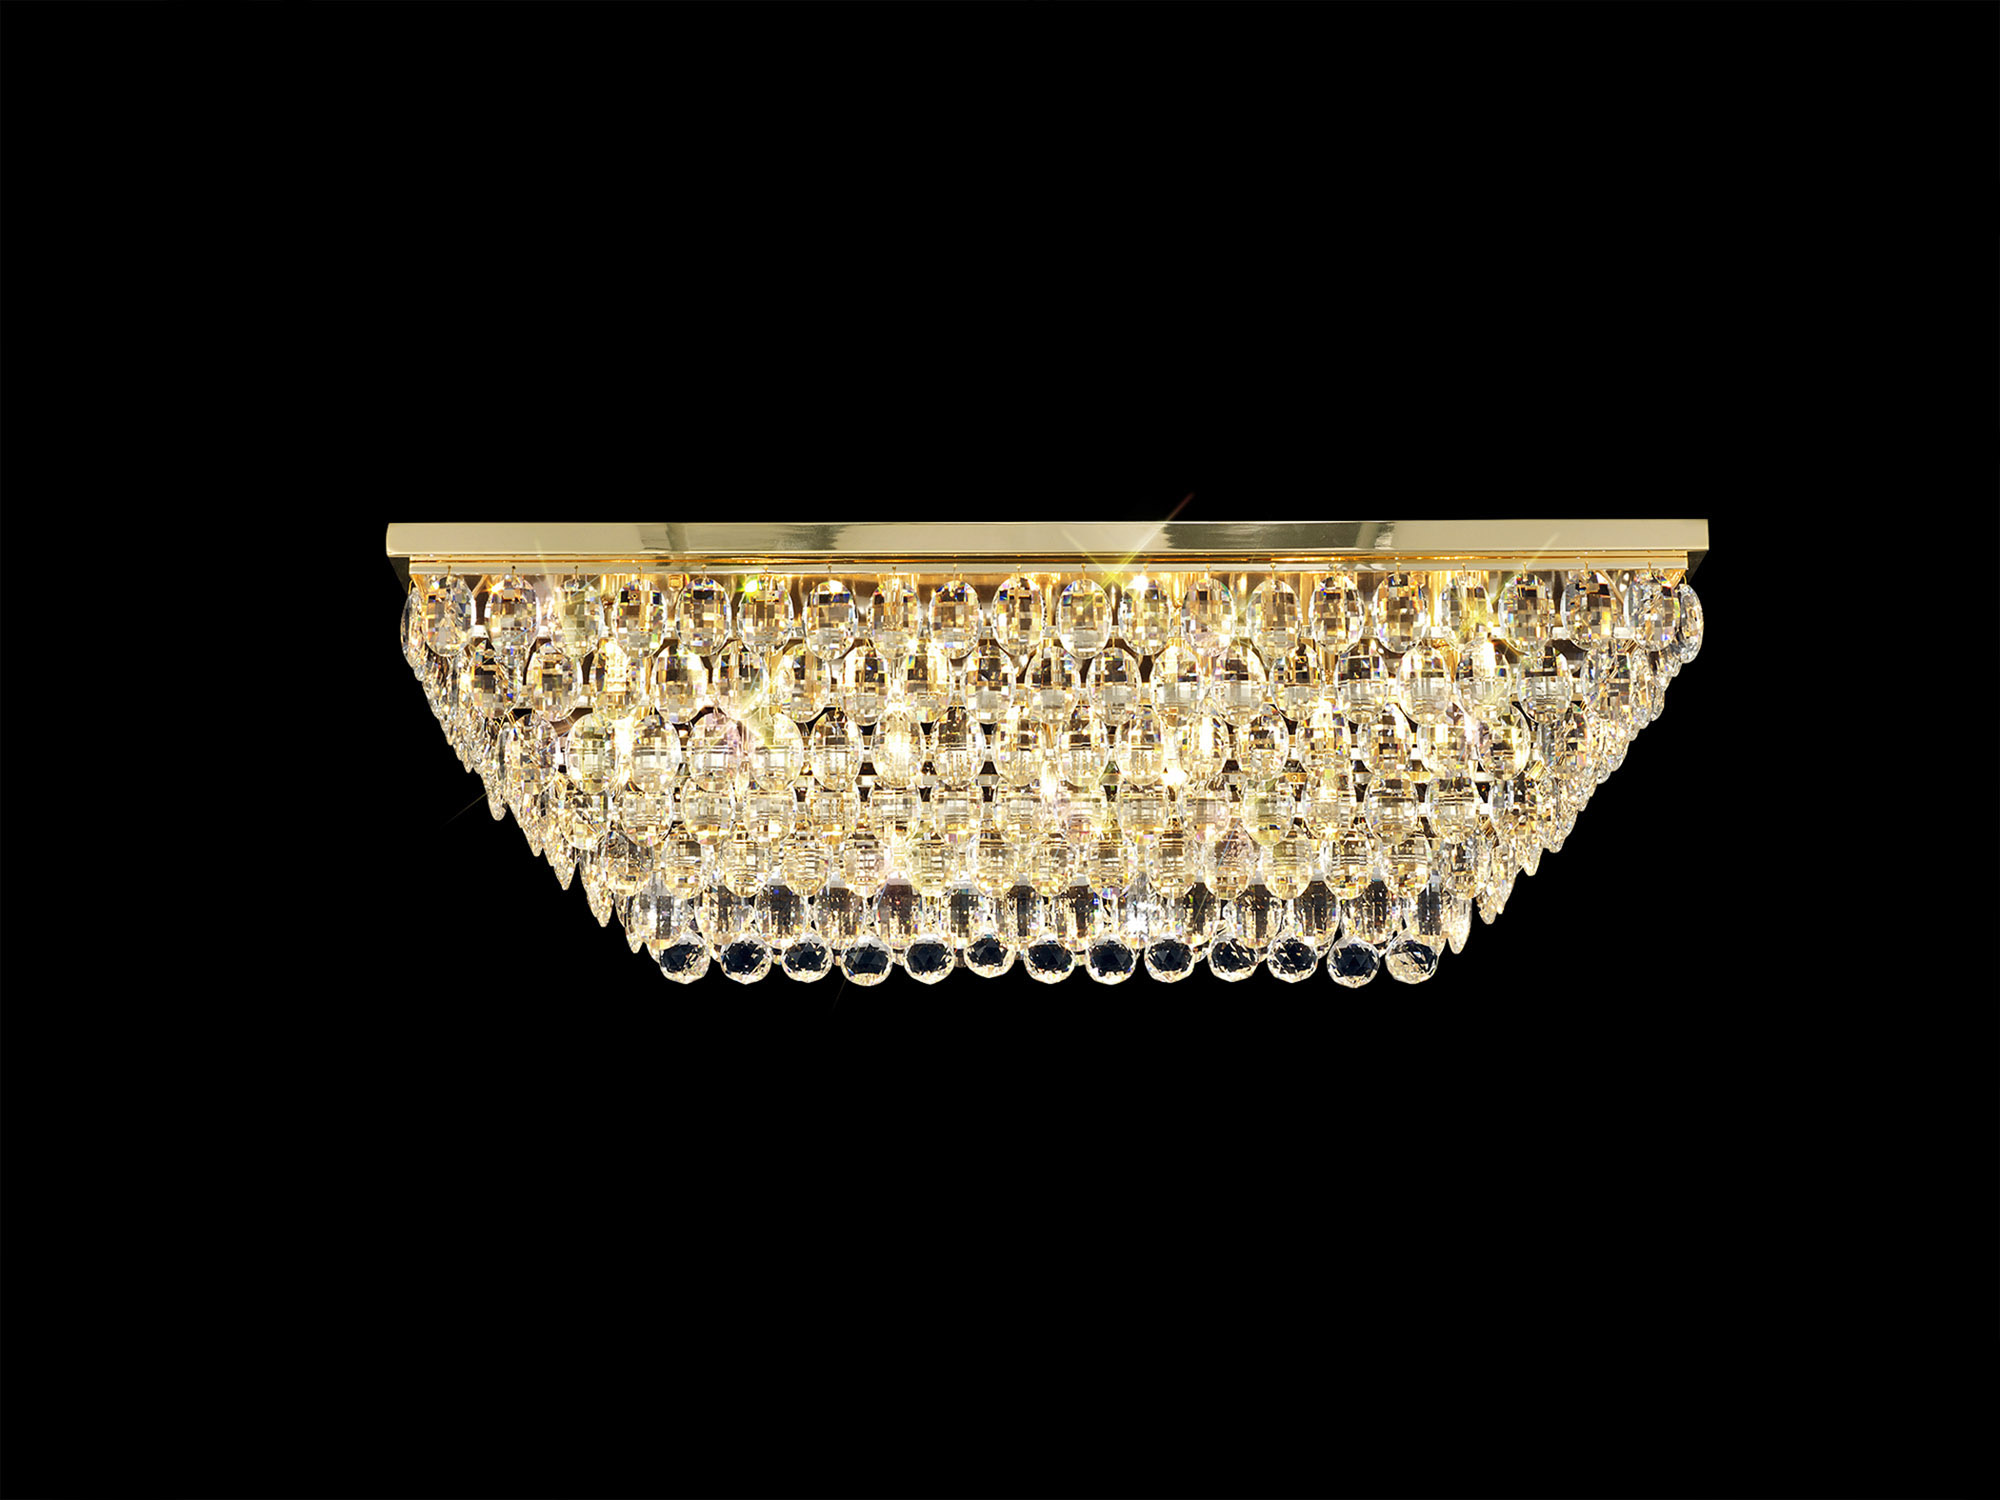 IL32827  Coniston Linear Flush Ceiling 11 Light (21.8kg) French Gold